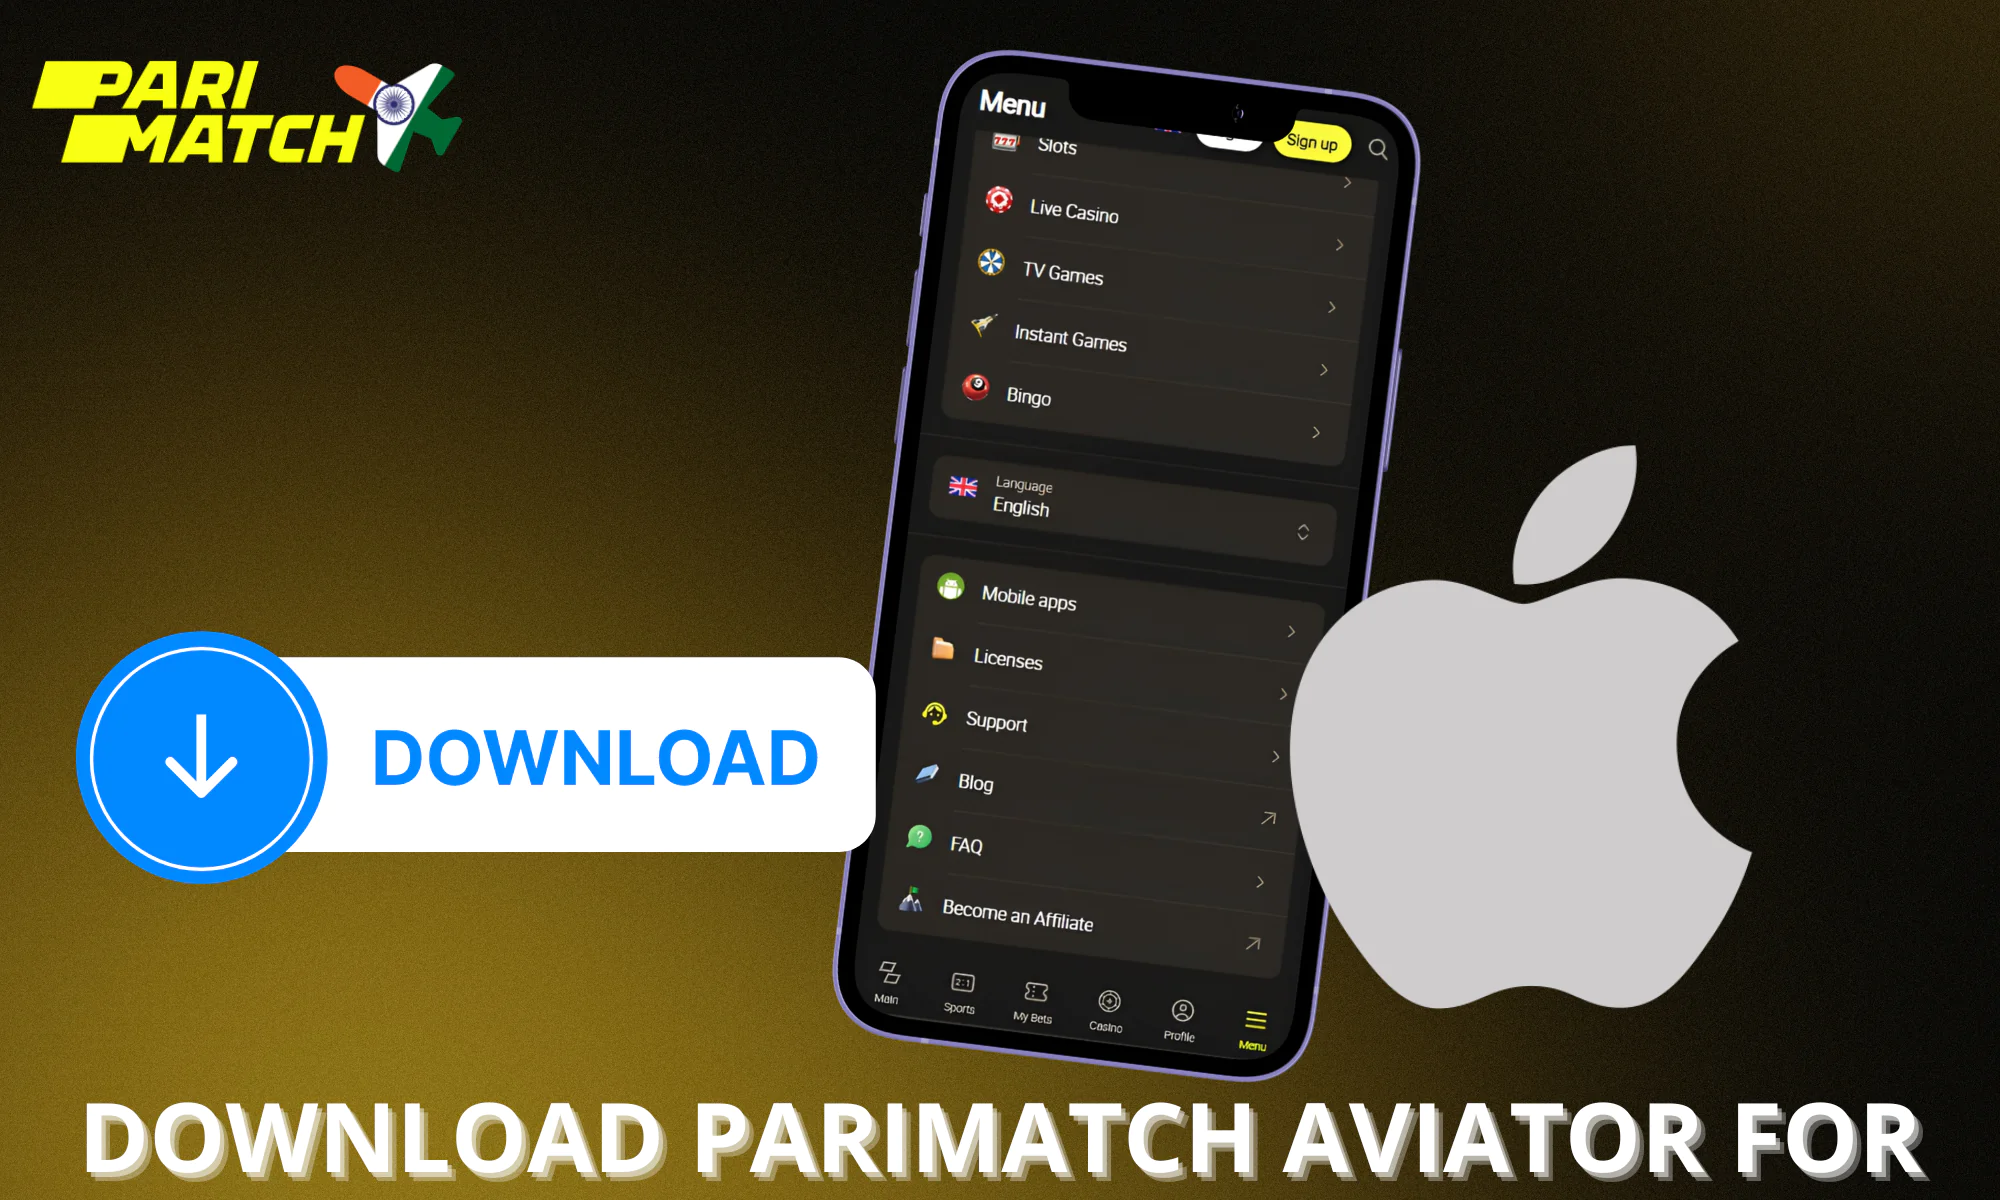 Step by step how to download Parimatch Aviator for IOS devices